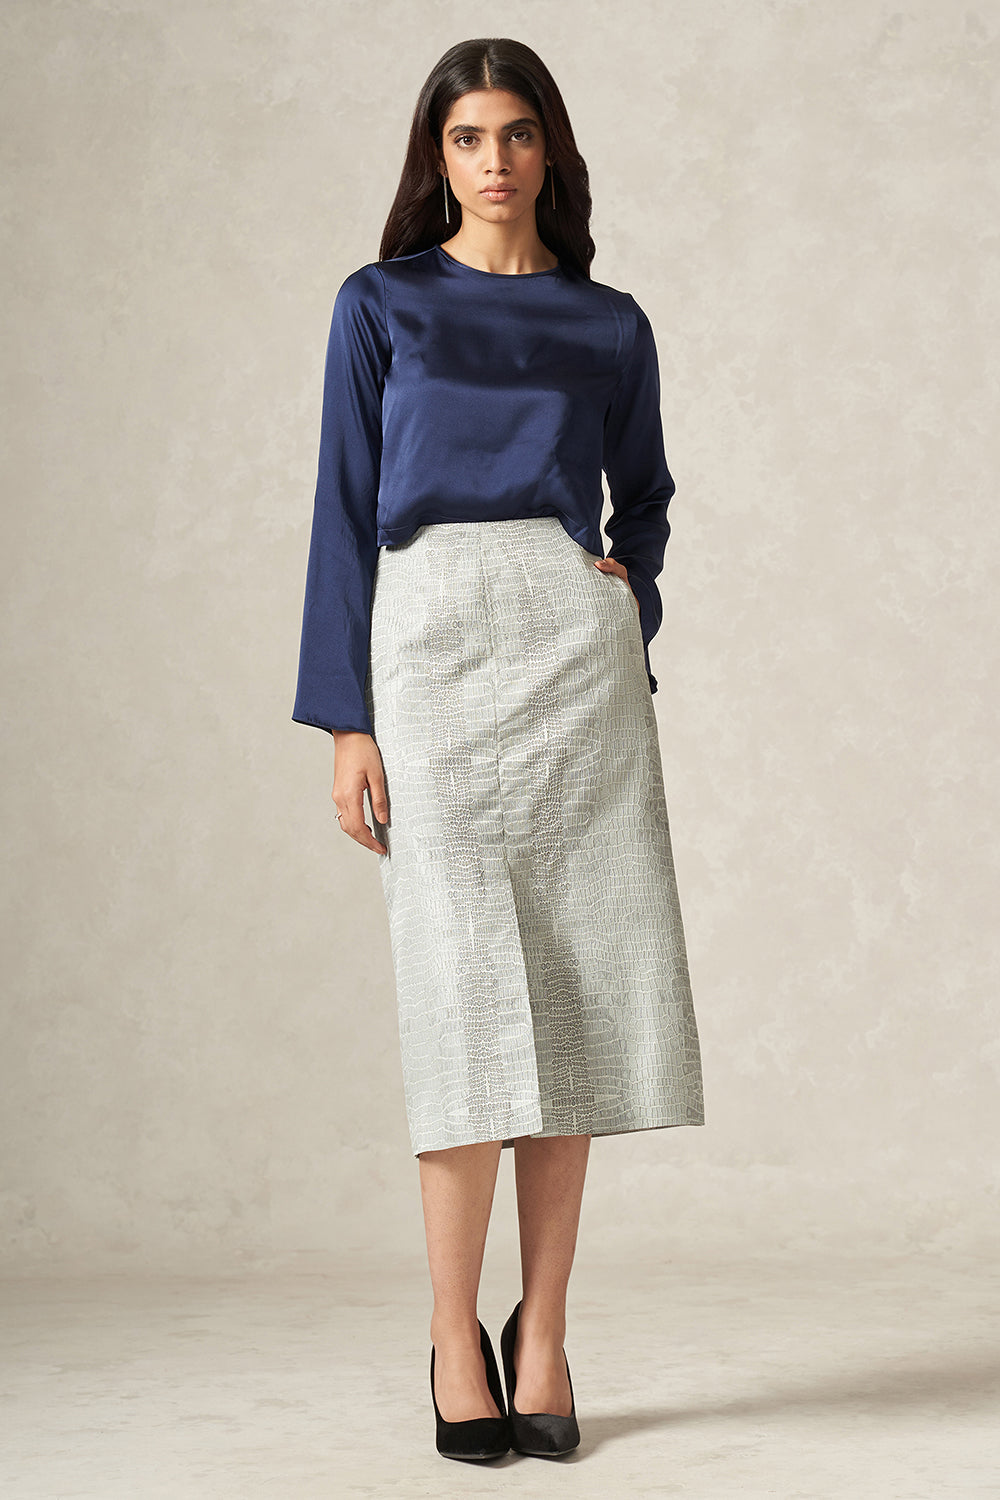 Grey Handwoven Pure Satin Silk Pencil Skirt with Crocodile Pattern and Front Slit